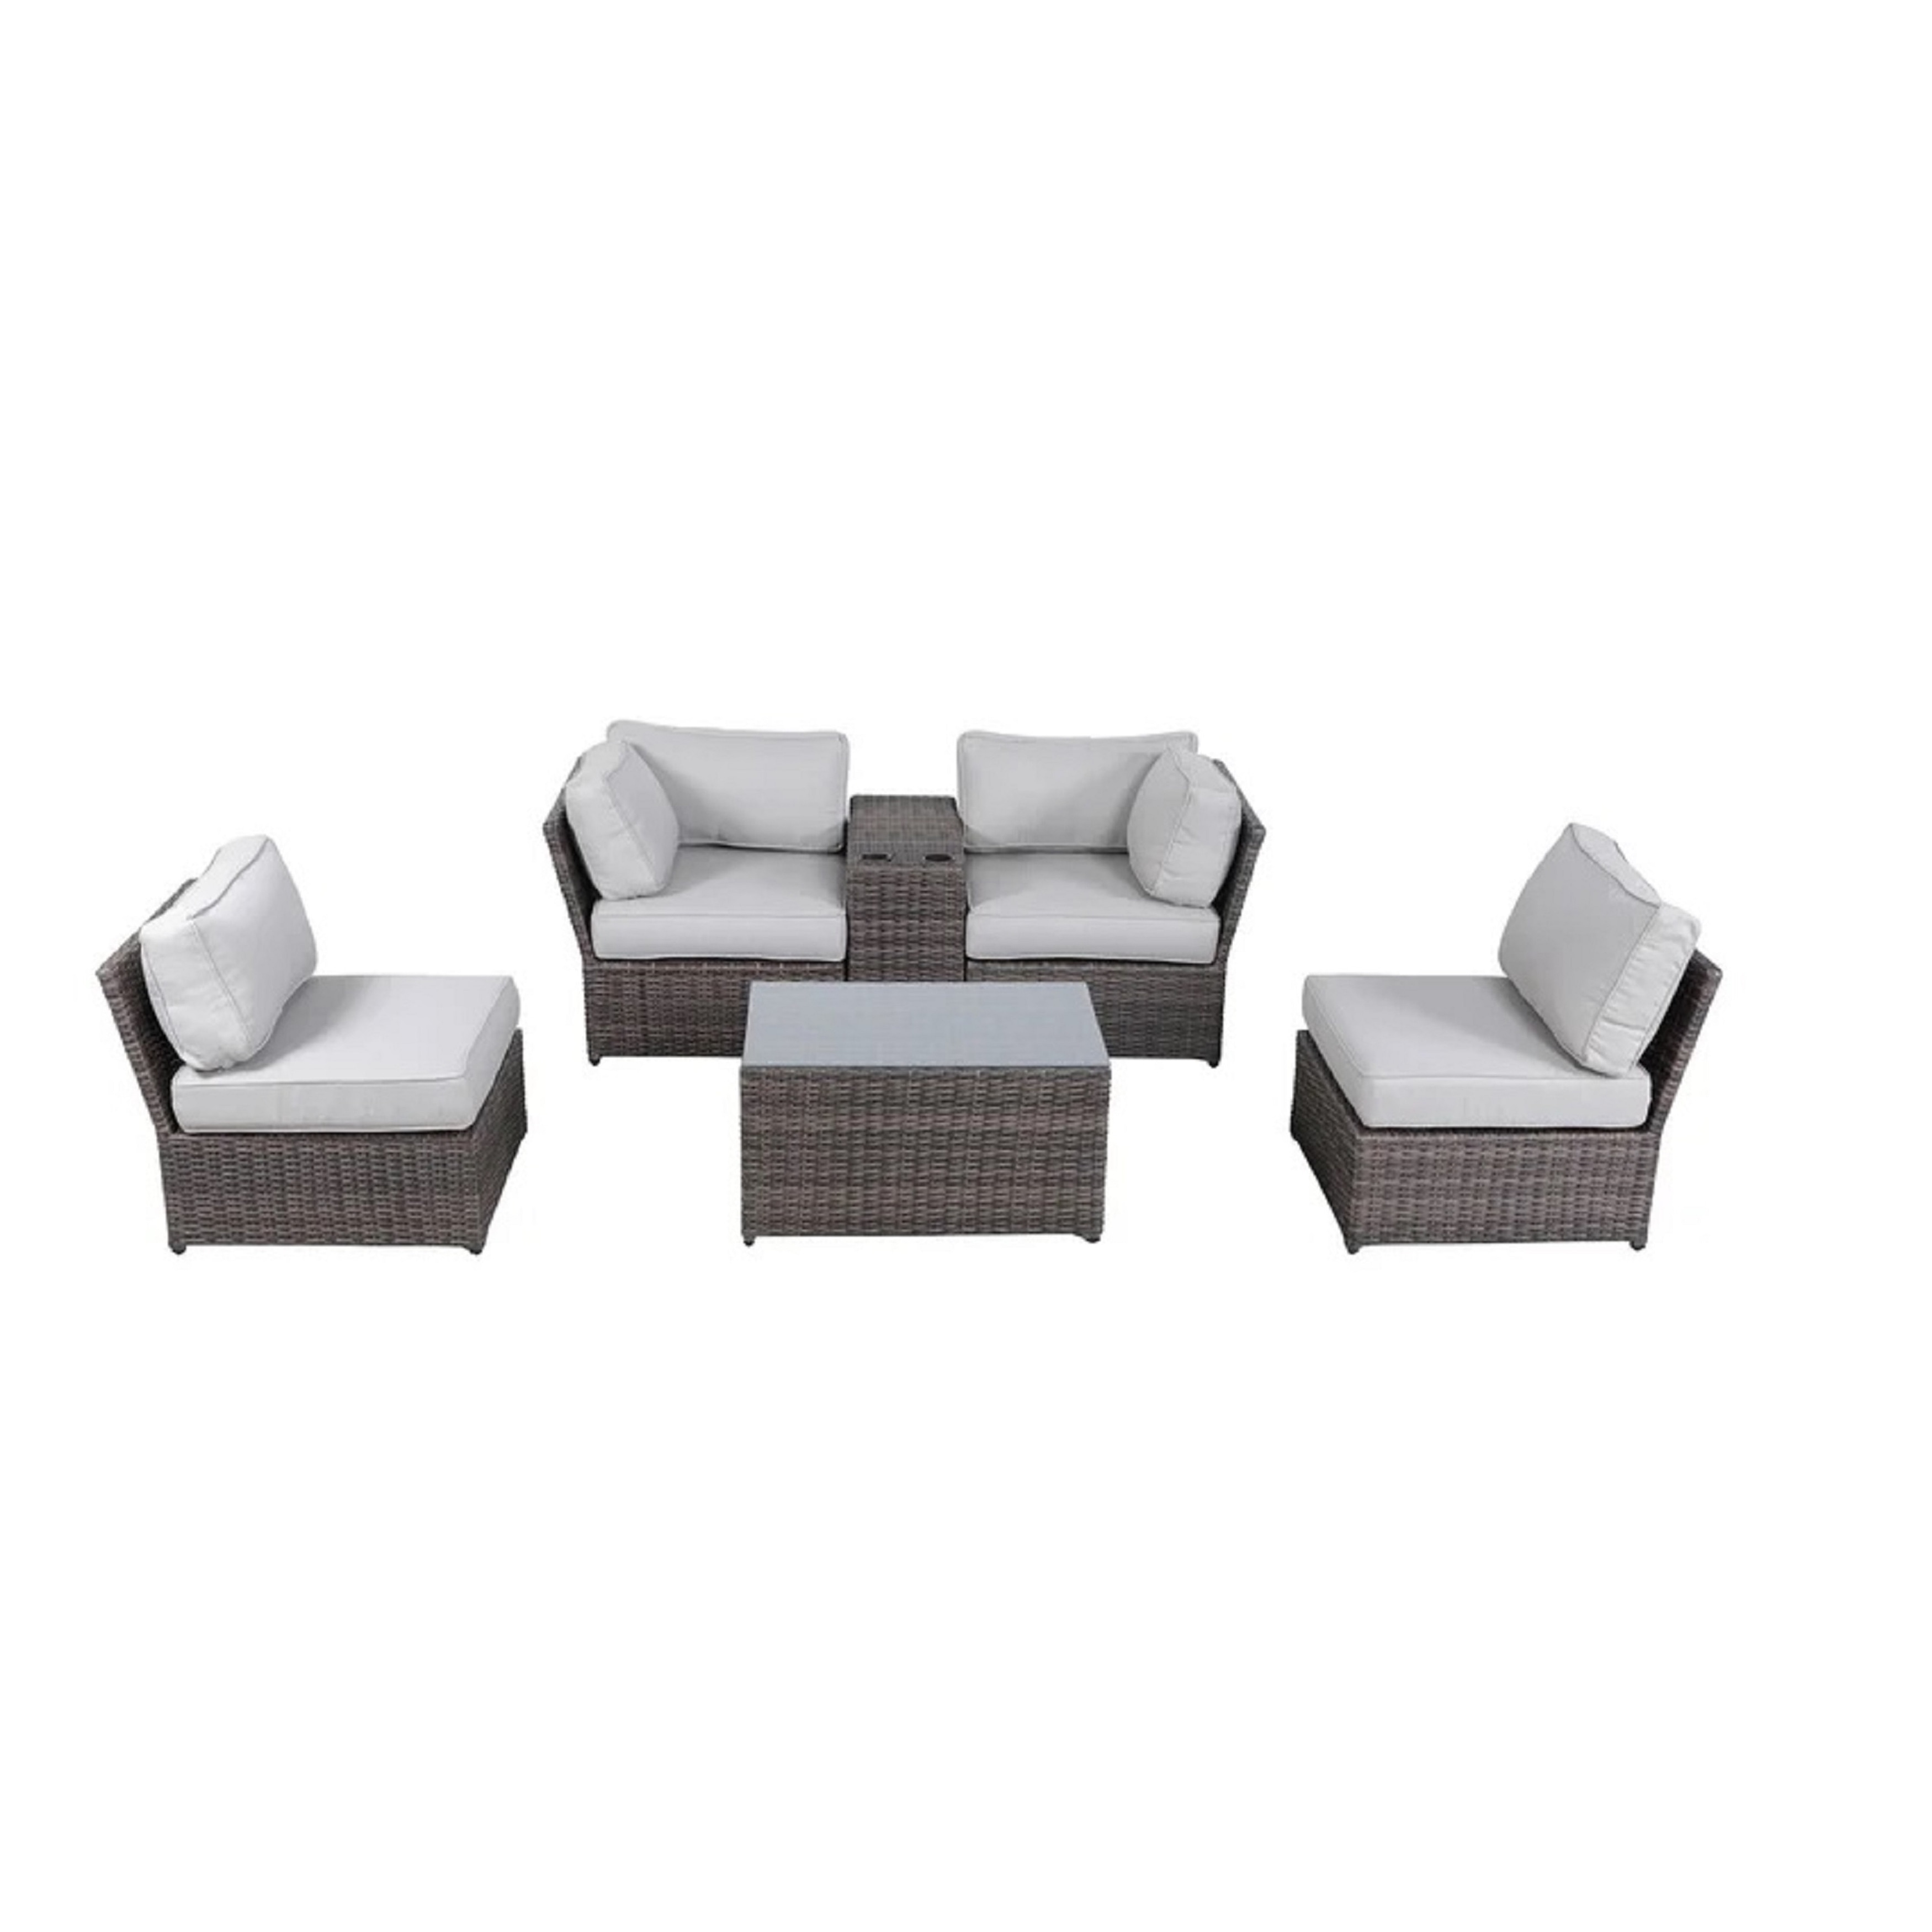 Lsi 6 Piece Rattan Multiple Chairs Seating Group With Cushions